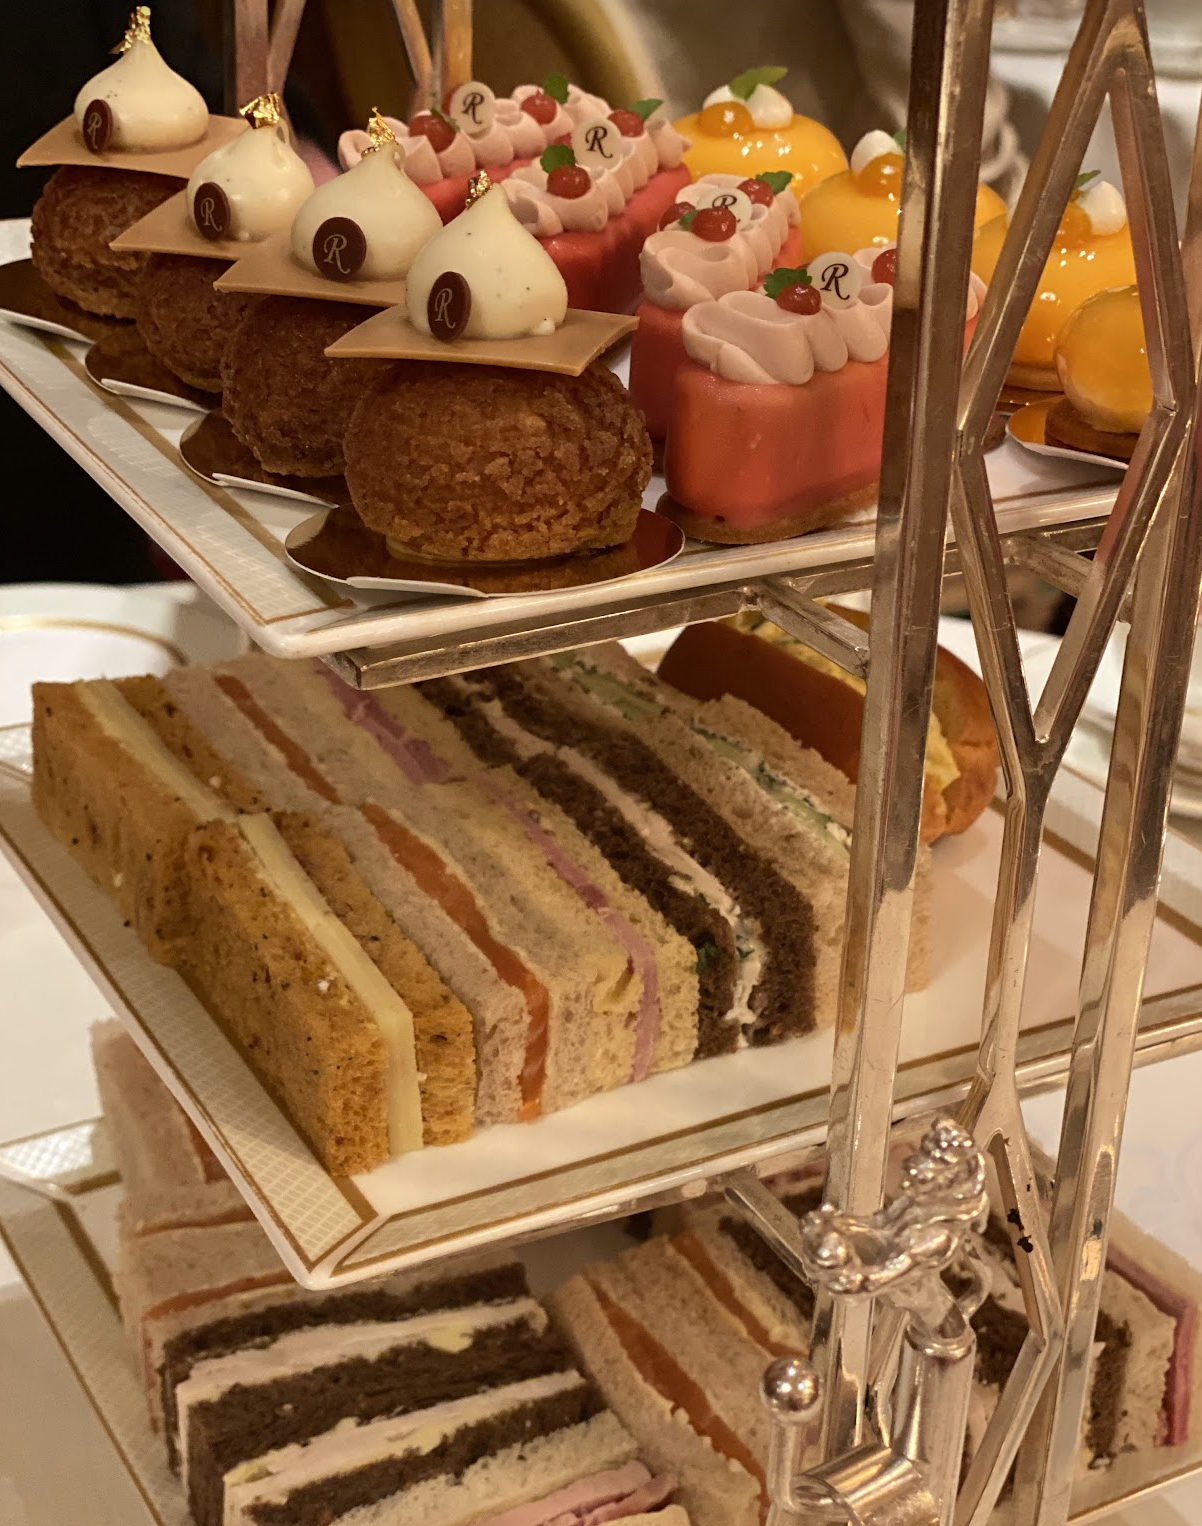 Afternoon tea at The Ritz London